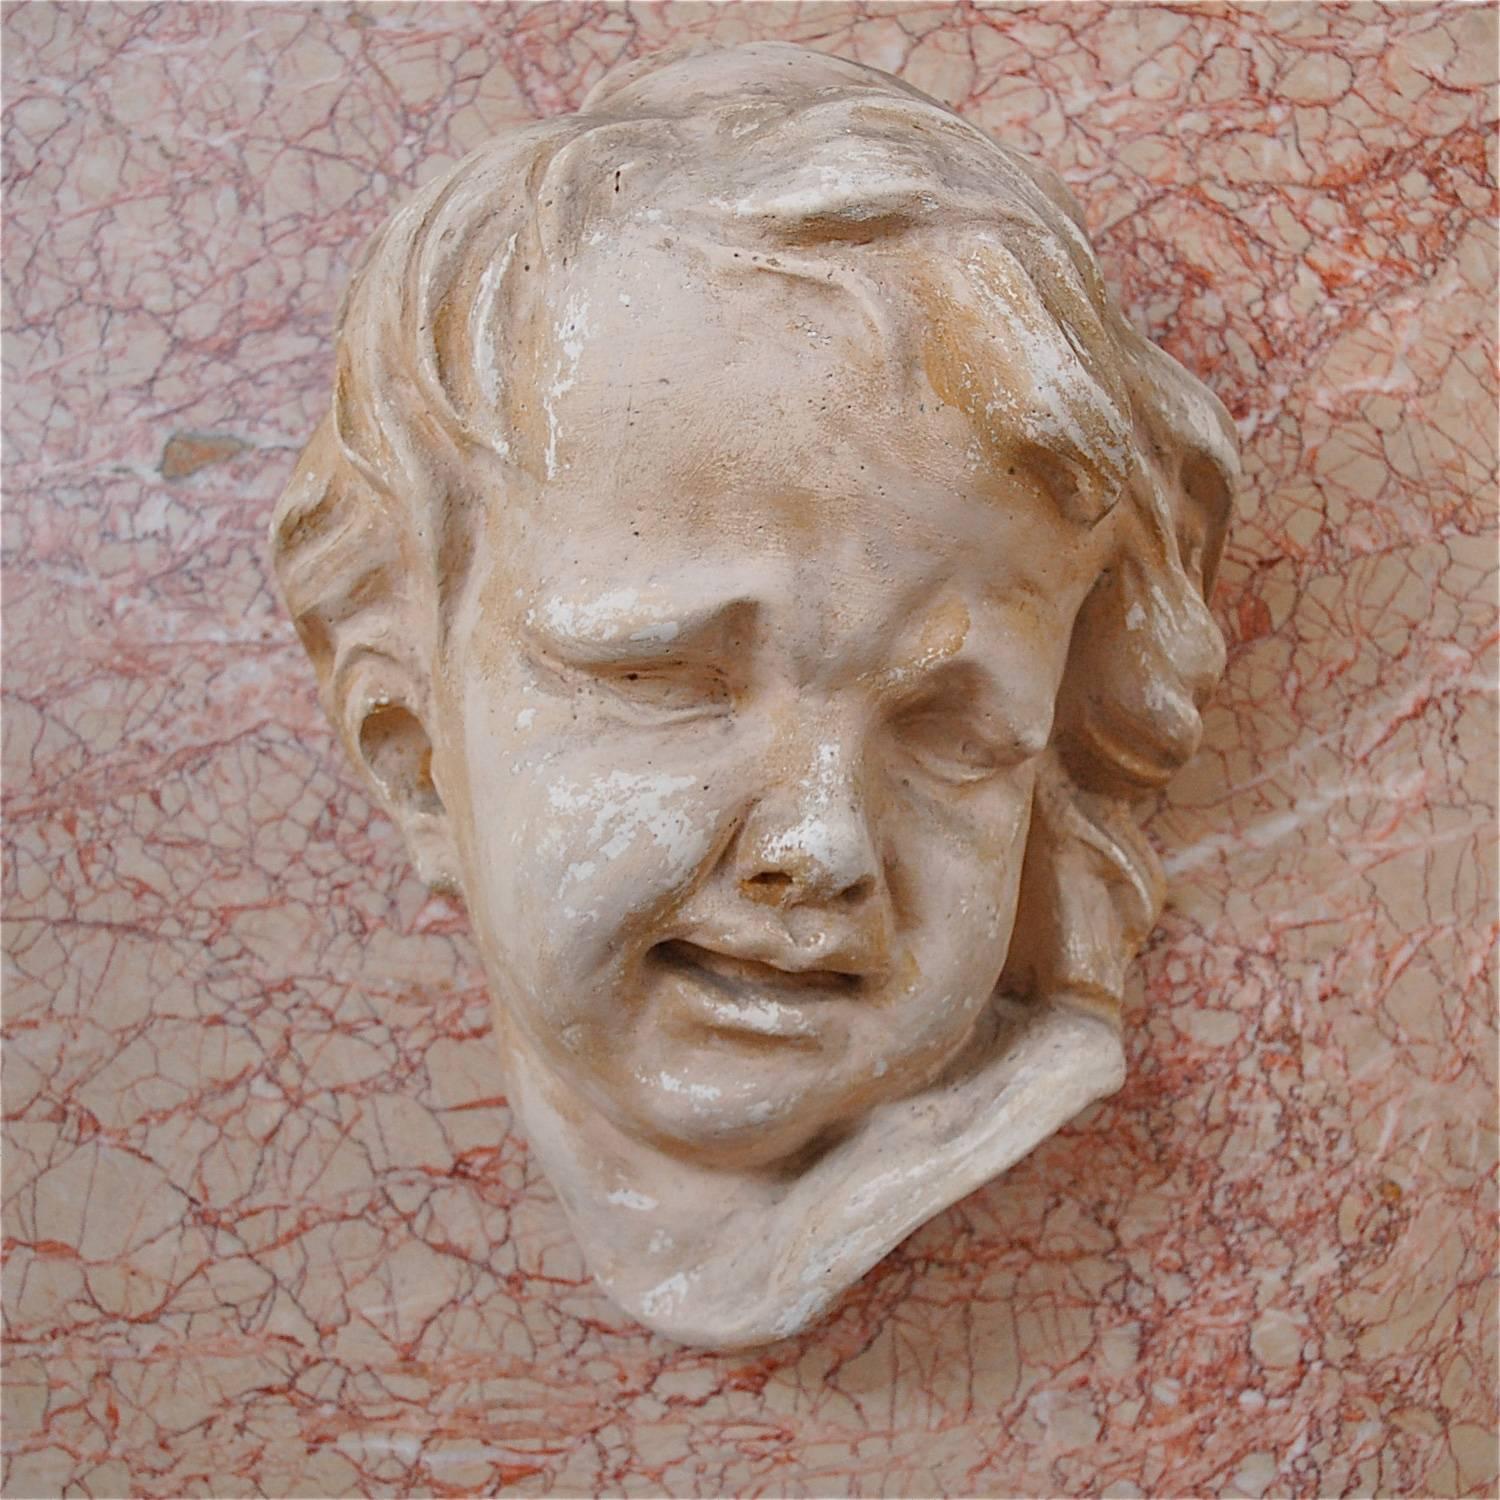 You cannot help but be drawn in by the dramatic expression of this cherub, angel or child's face. The natural ageing of the sculpture that's occurred over the years has added character and tone. This piece is cast in plaster by an unknown artist,